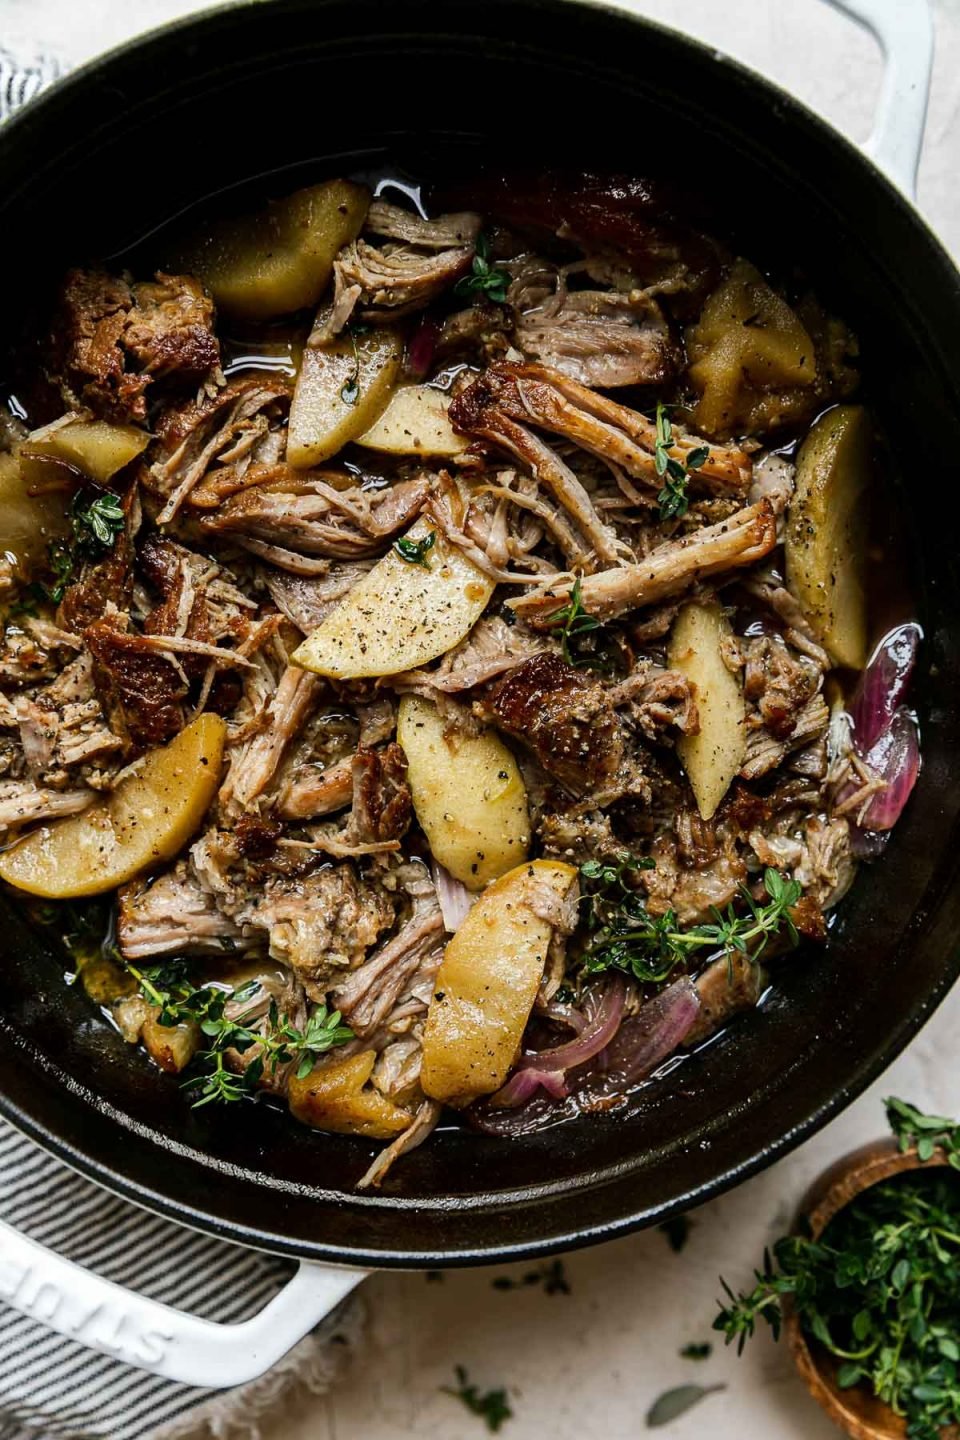 Apple Cider Braised Pork Shoulder in a white Dutch oven atop a creamy cement surface. Fresh thyme has been sprinkled on top. A small pinch bowl of additional fresh herbs, a white & blue striped linen napkin sit alongside the Dutch oven.